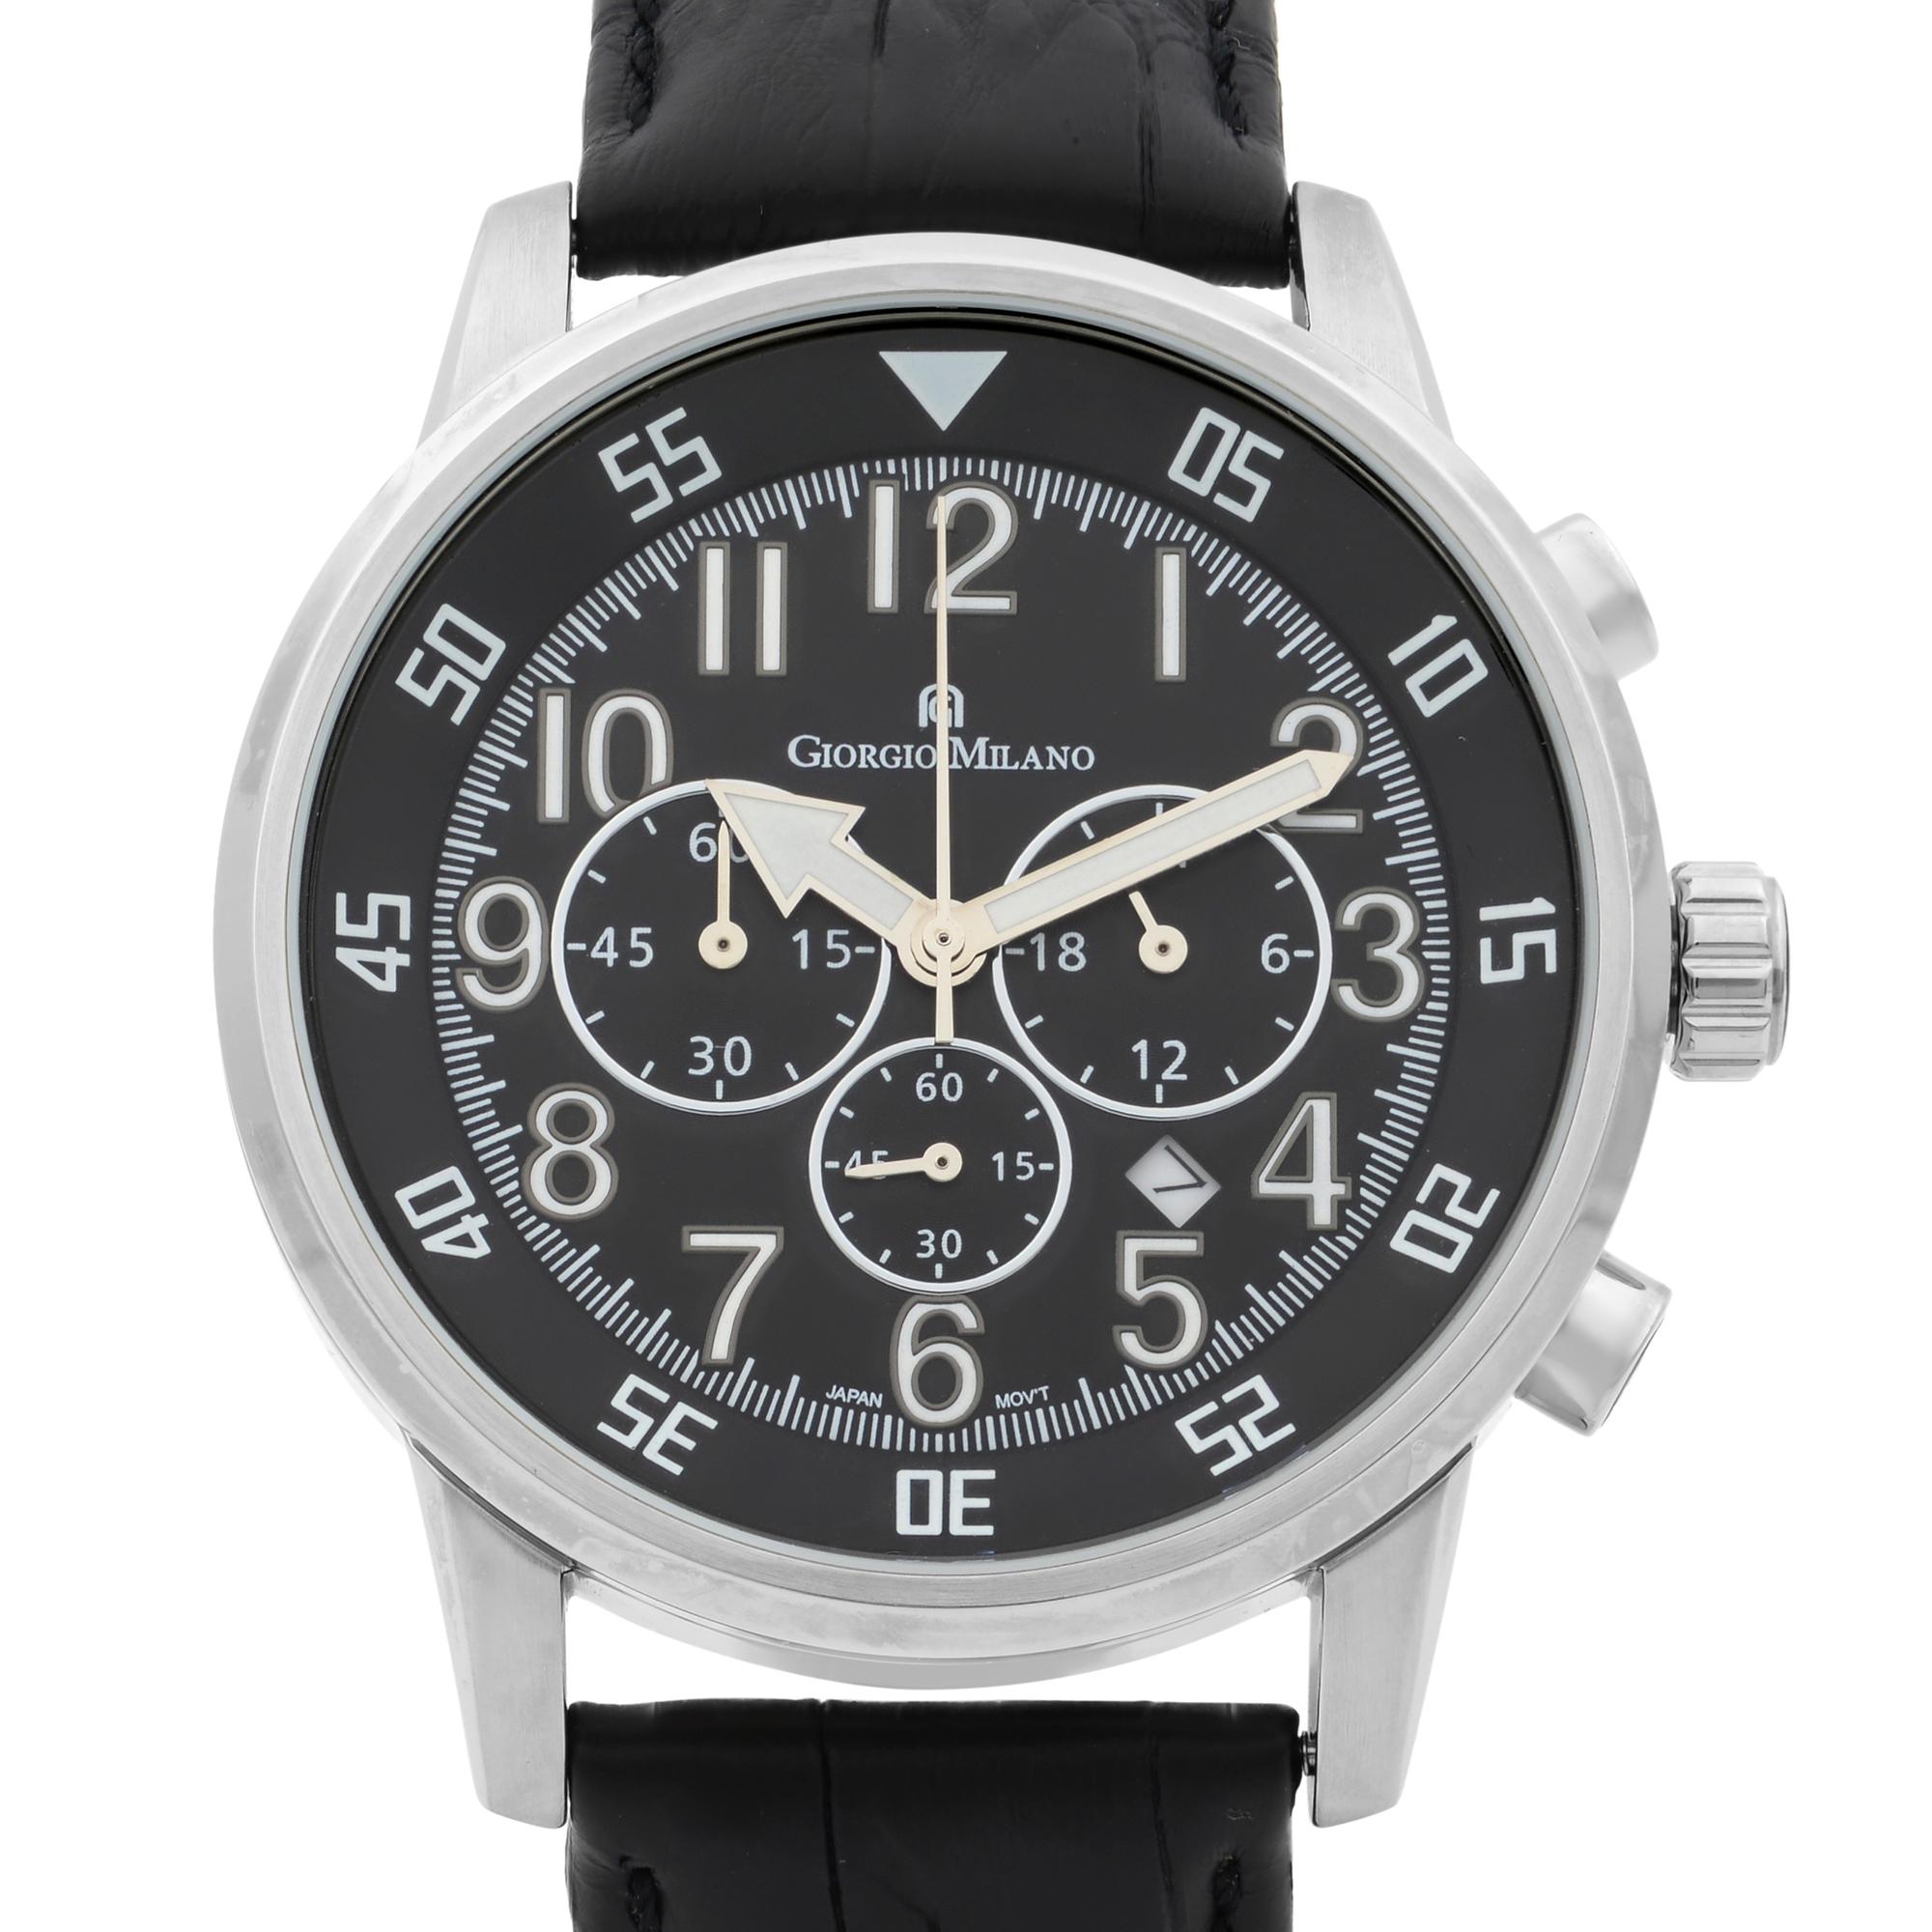 Giorgio Milano Steel Chronogprah Black Dial Quartz Mens Watch GM853SLBK:
Movement Type	Quartz (Battery)
Gender	Men's
Case Material	Stainless Steel
Weight in grams	80.1
The watch comes with original box and papers. 
